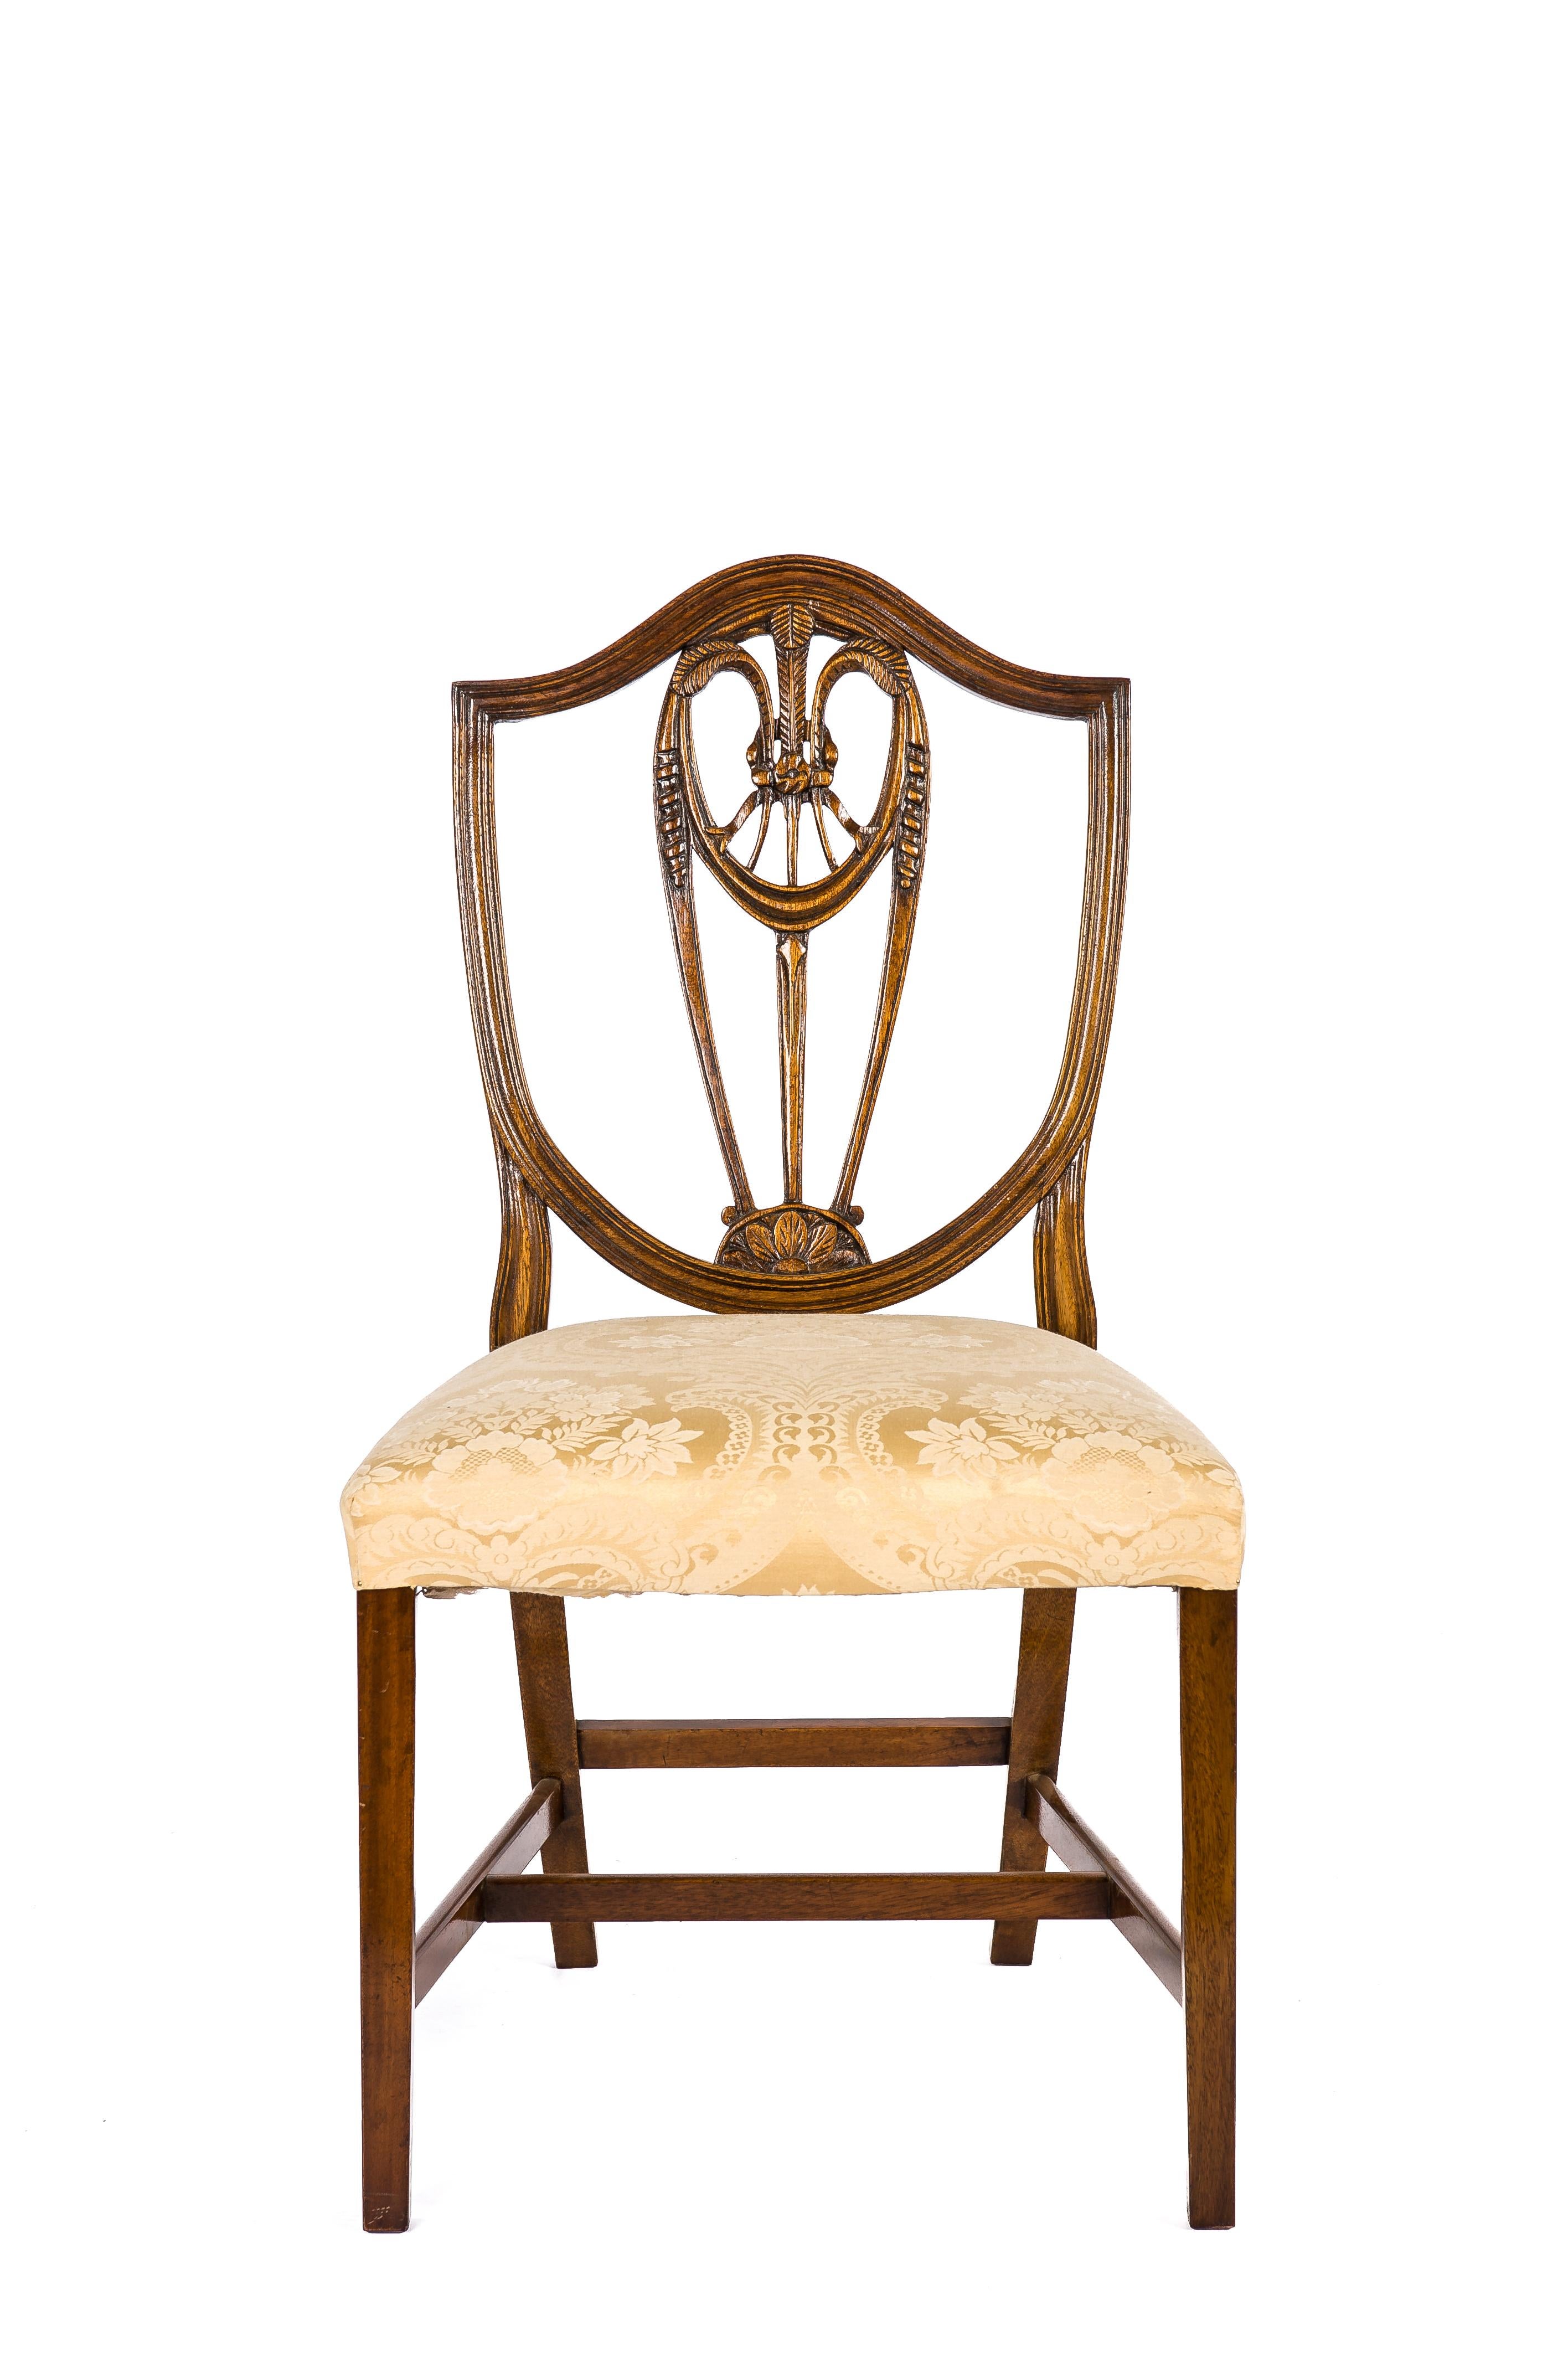 Beautiful pair of George III hand-carved mahogany dining chairs in the manner of George Hepplewhite.
Both chairs have a shield-shaped lyre back with wheat ear decoration, square tapering legs, and cross stretchers. The solid hand-carved mahogany